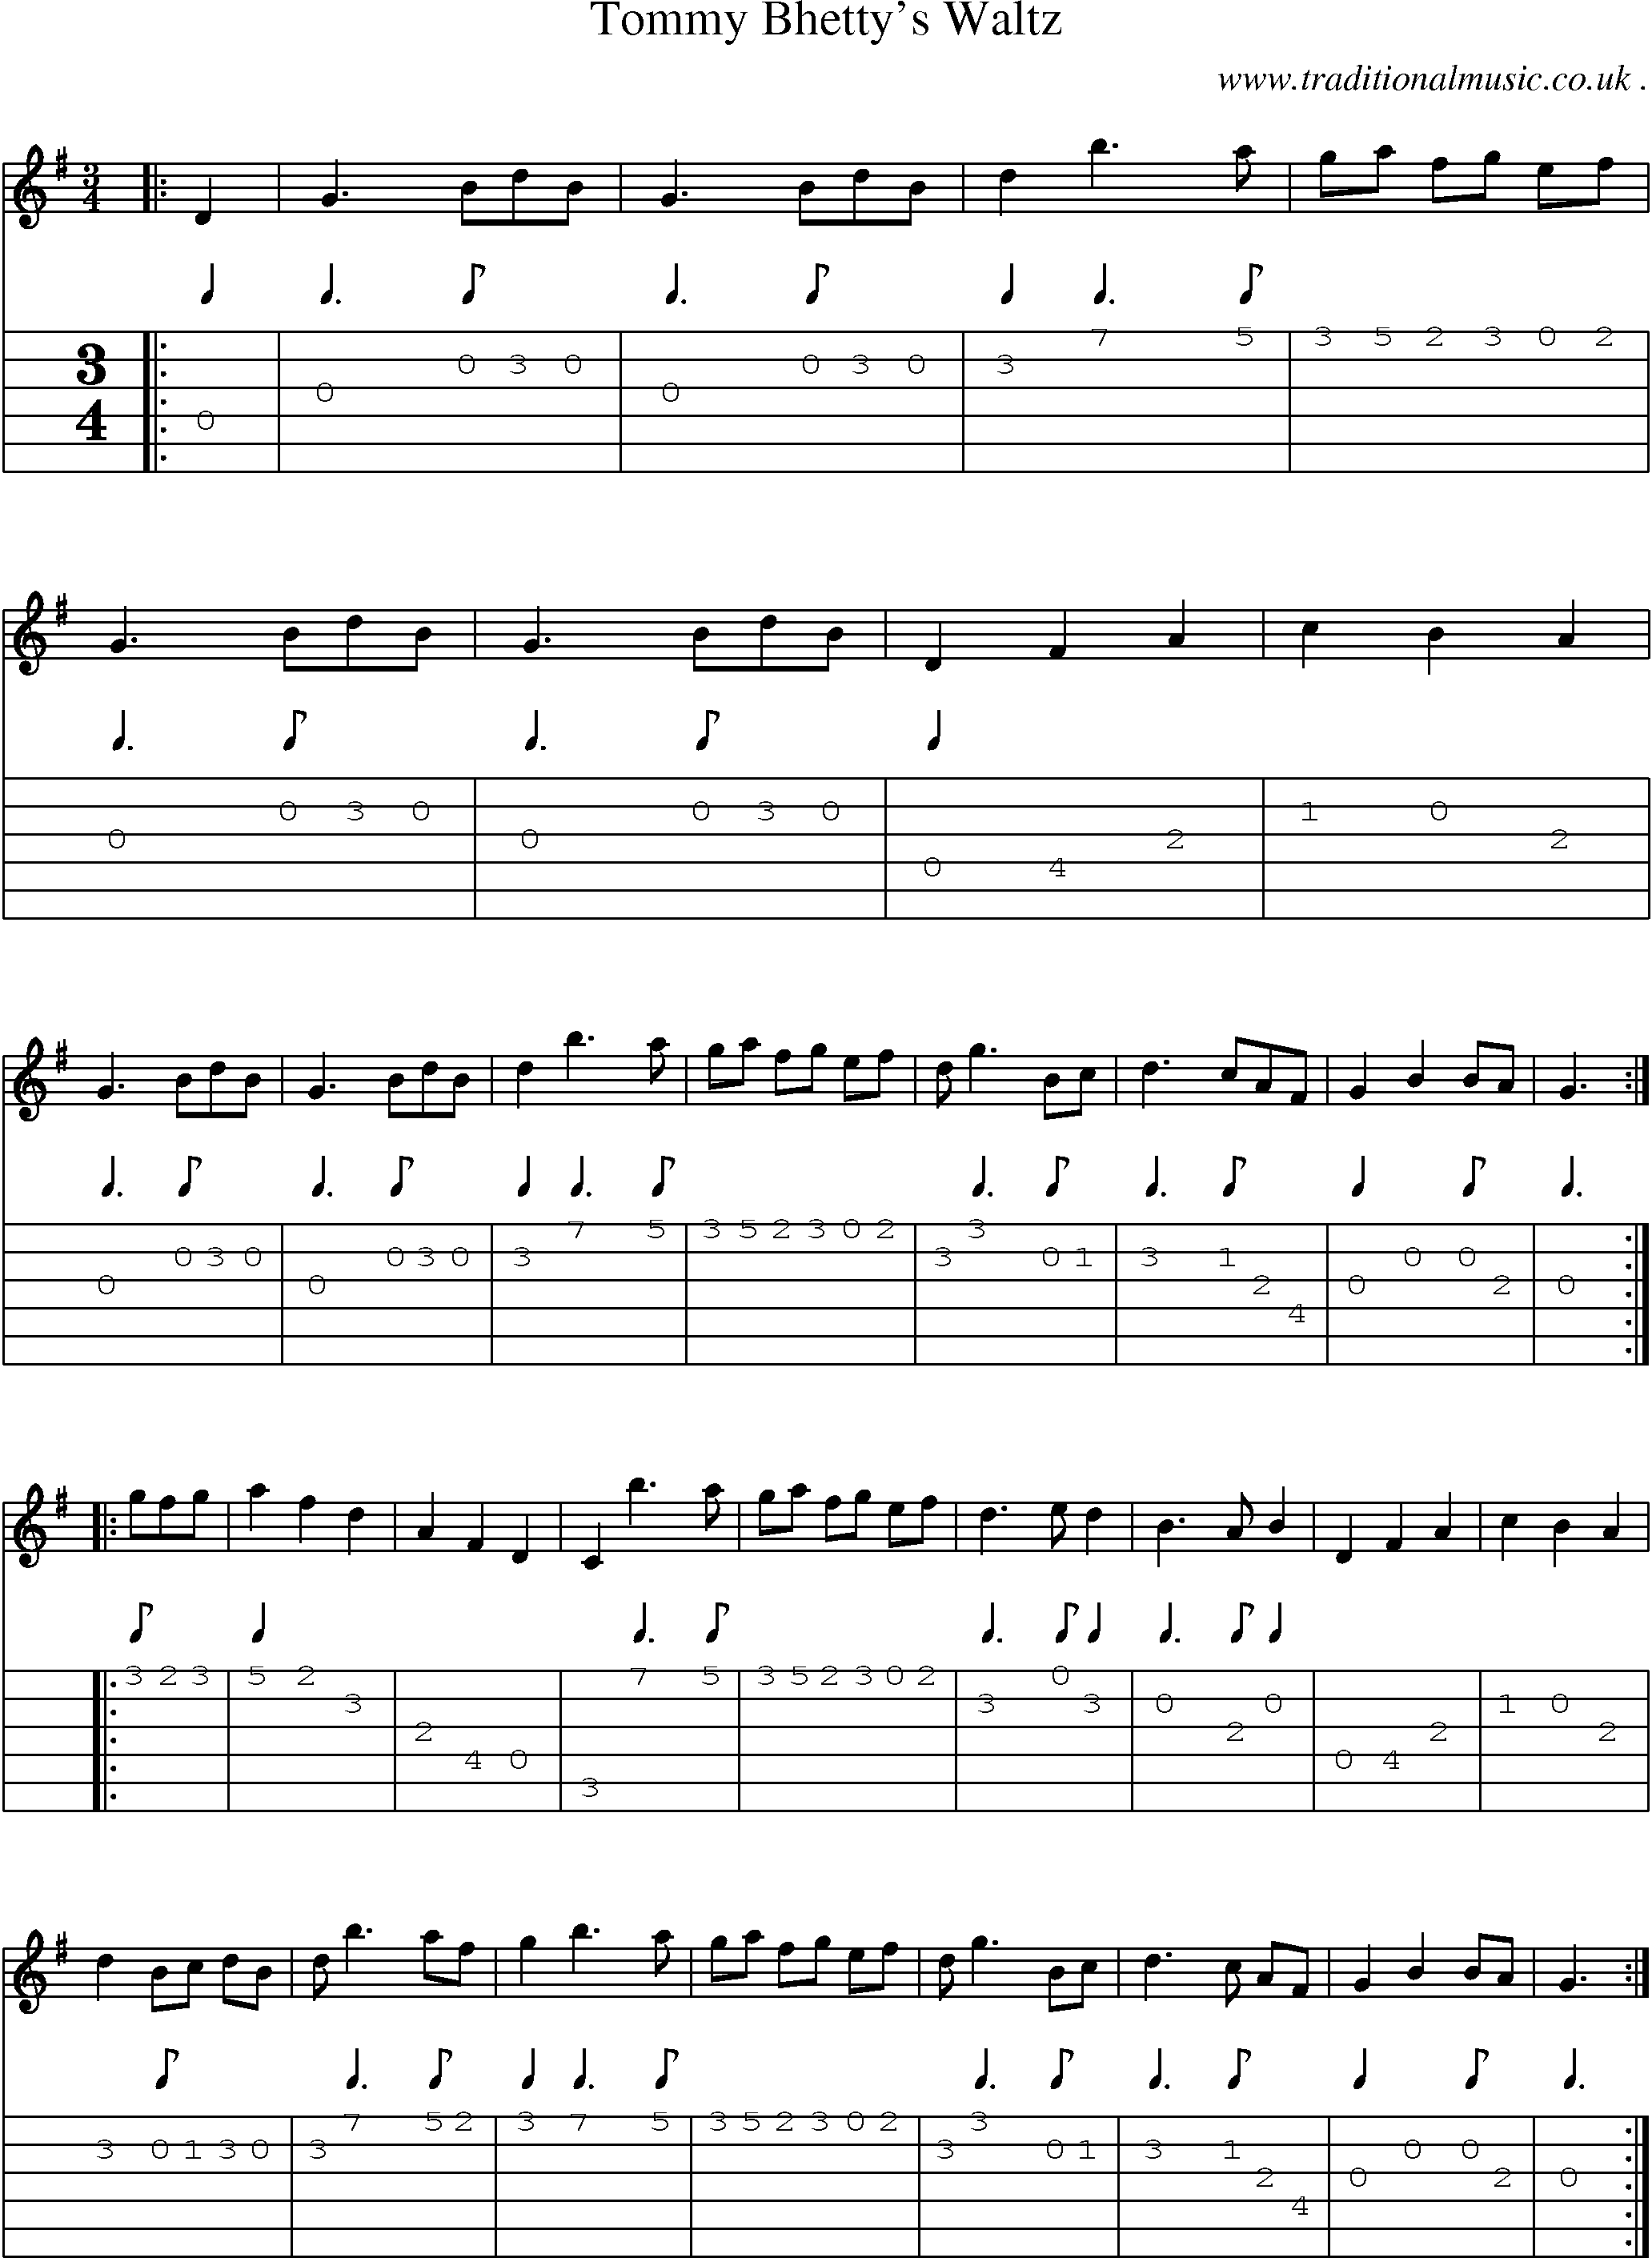 Music Score and Guitar Tabs for Tommy Bhettys Waltz